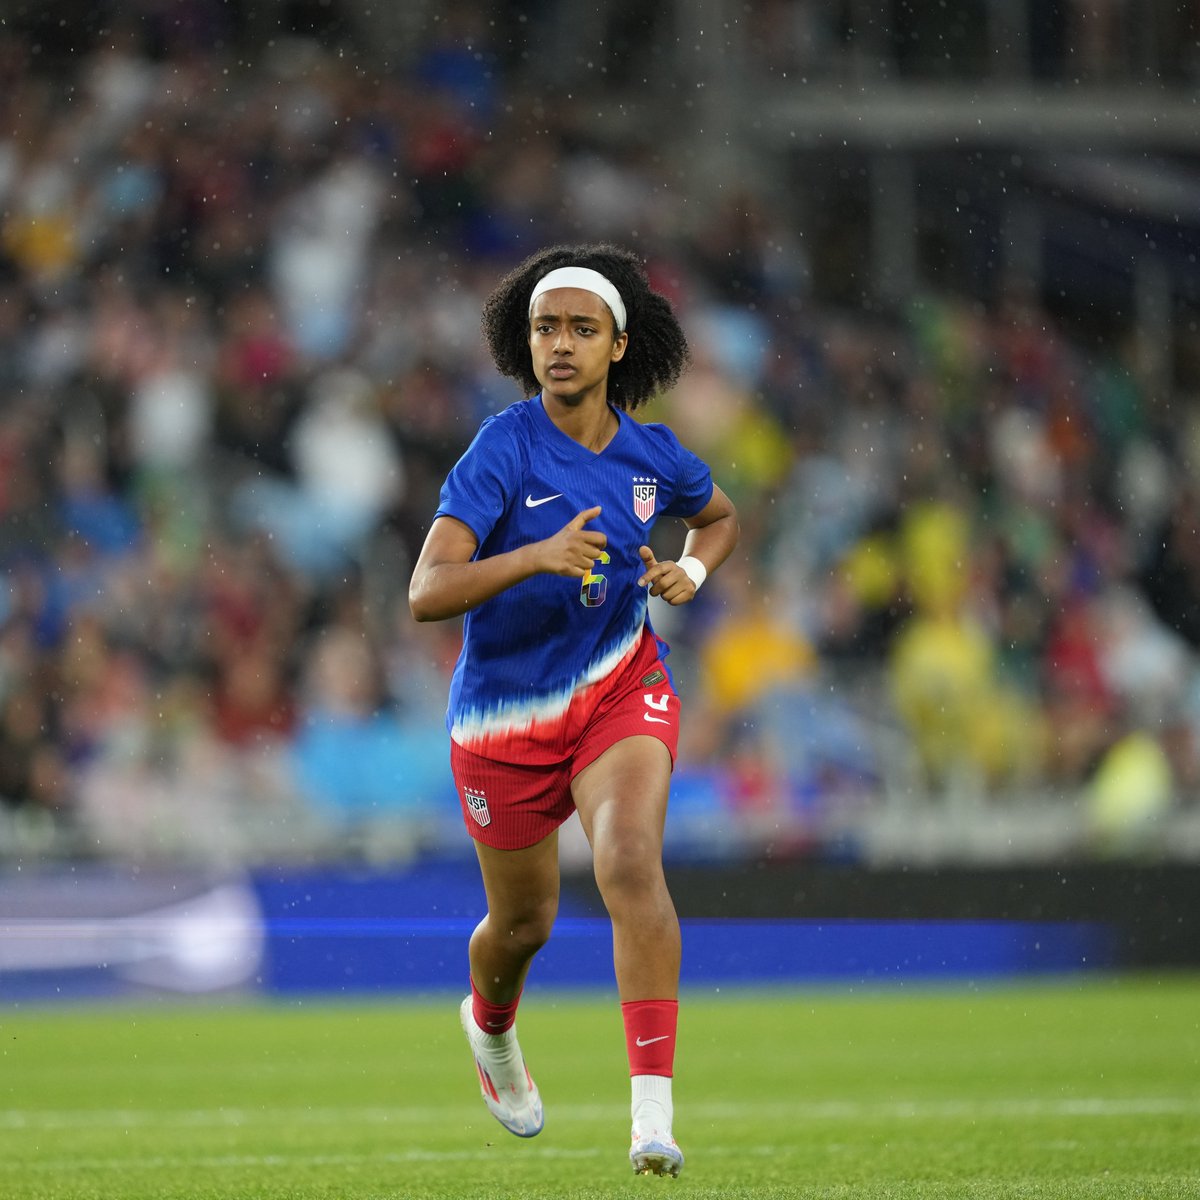 16 years and 358 days old.

Lily Yohannes is the eighth-youngest player all-time to debut for the #USWNT and is the youngest player to take the field for the USWNT since March 2001 🇺🇸